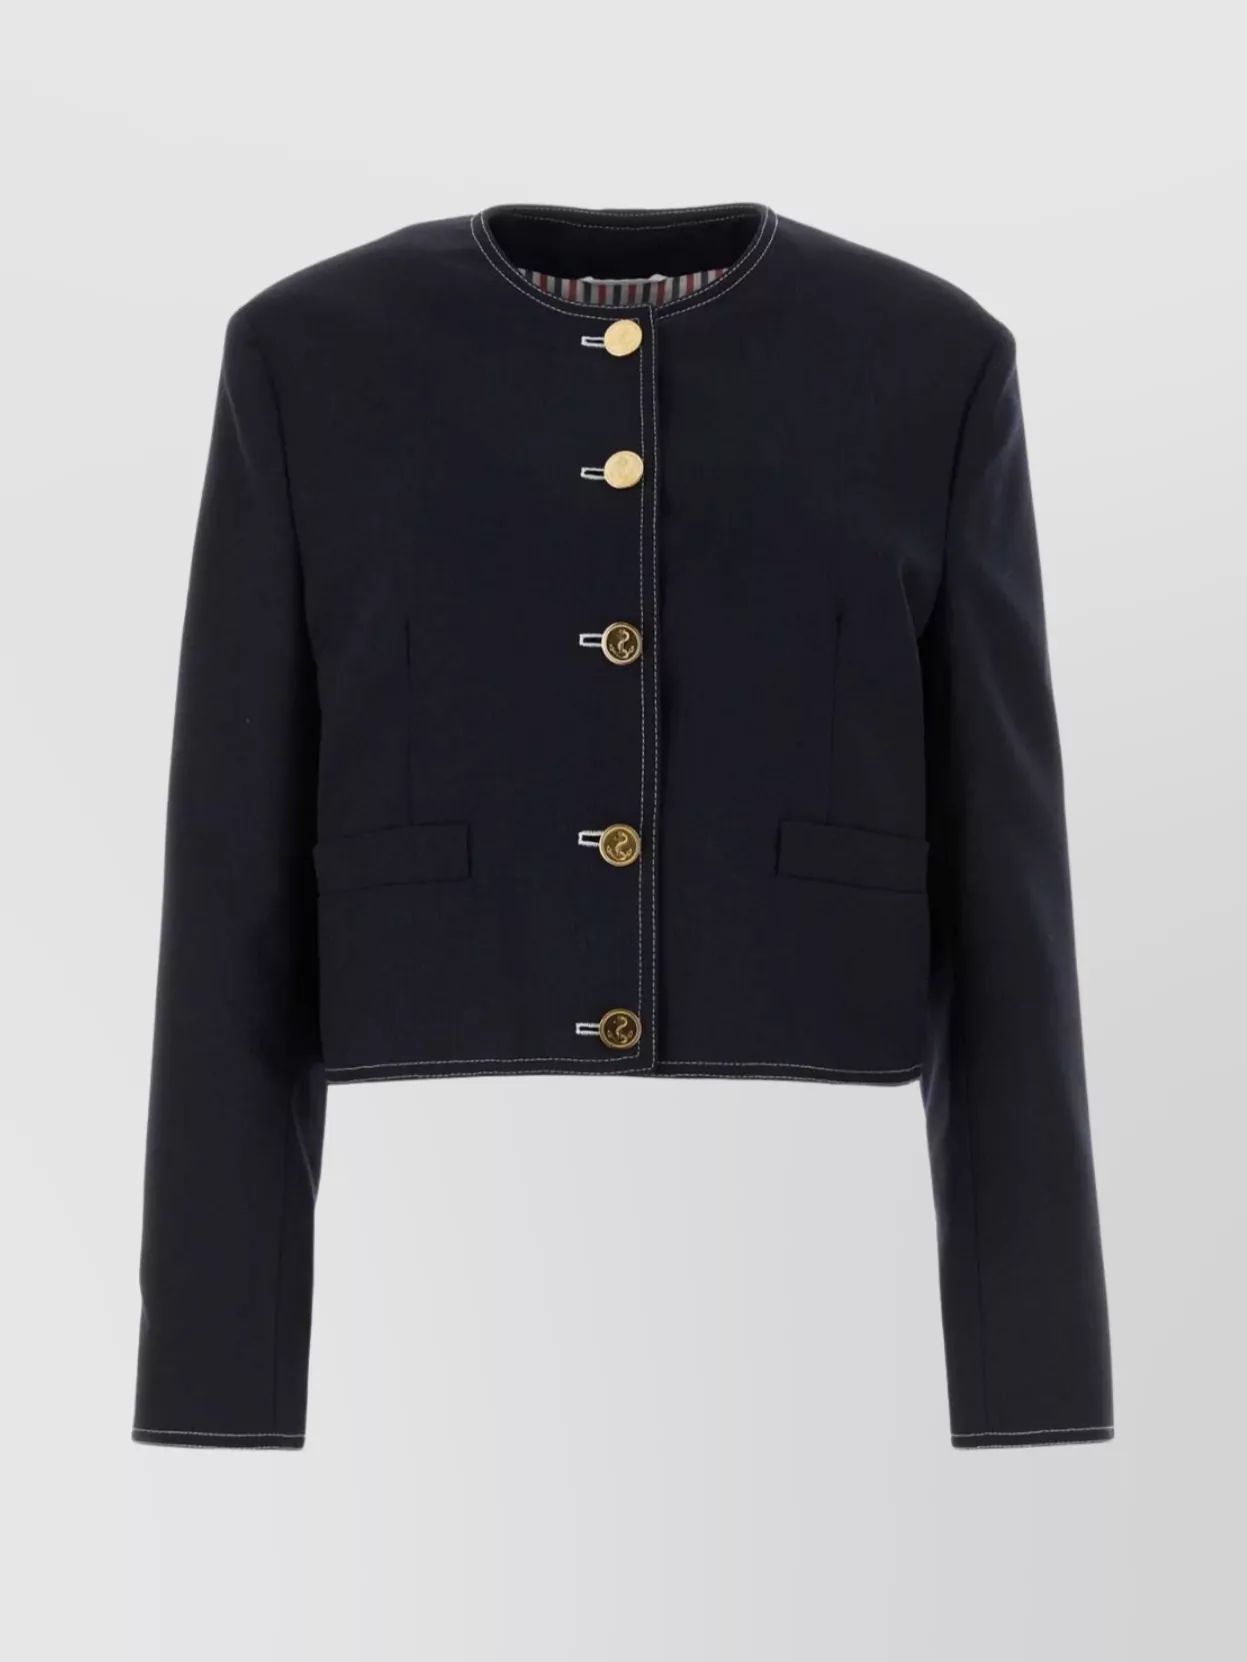 THOM BROWNE WOOL BLAZER WITH CONTRAST PIPING AND DECORATIVE BUTTONS